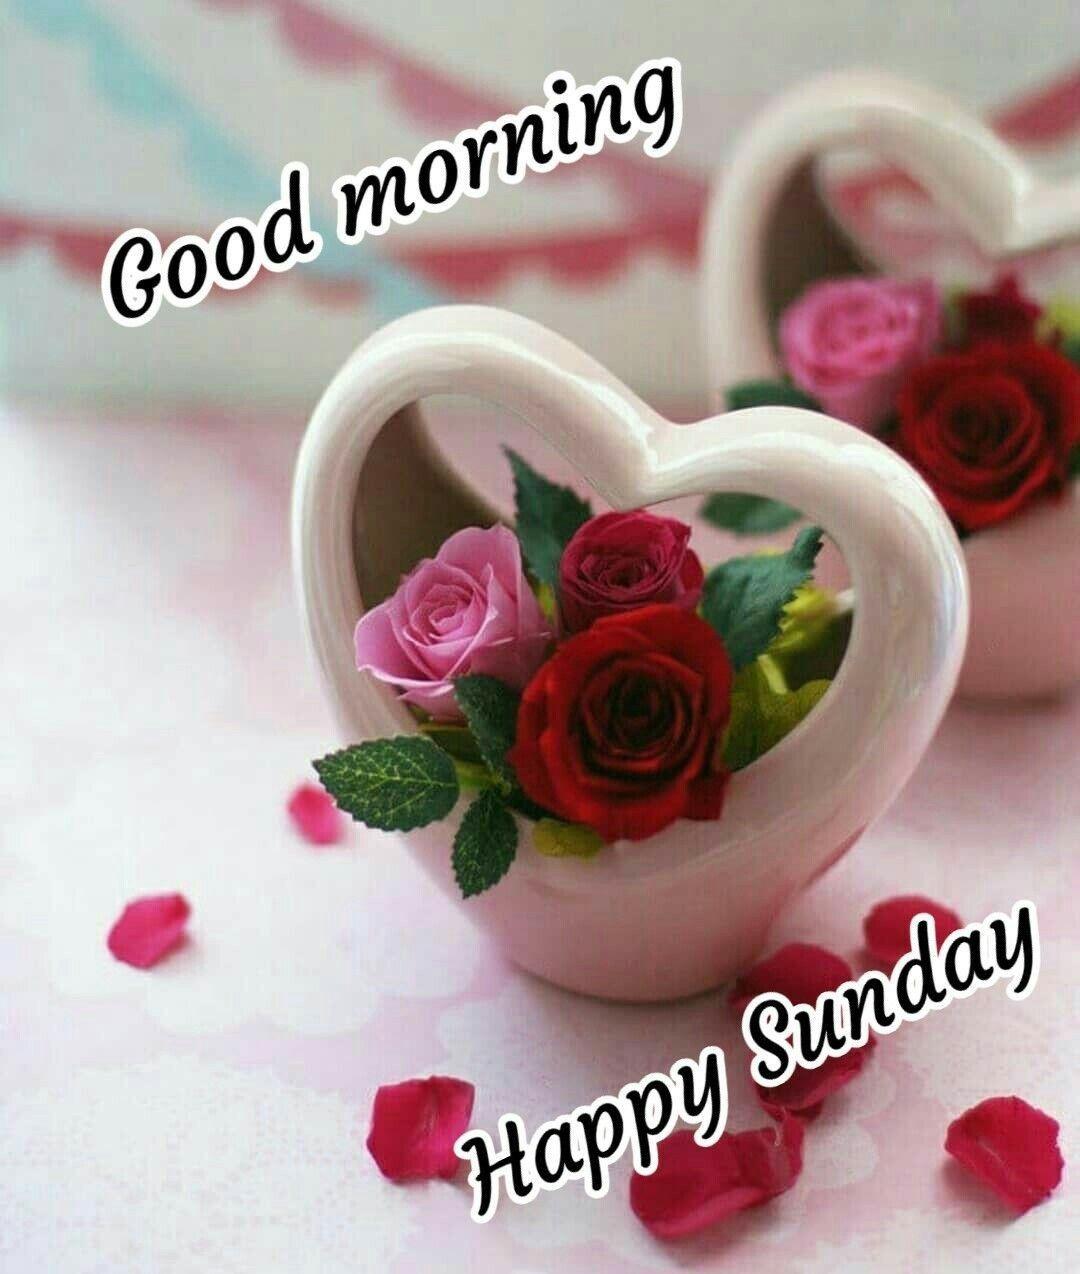 81 Happy Sunday Good Morning Images Photos HD Download